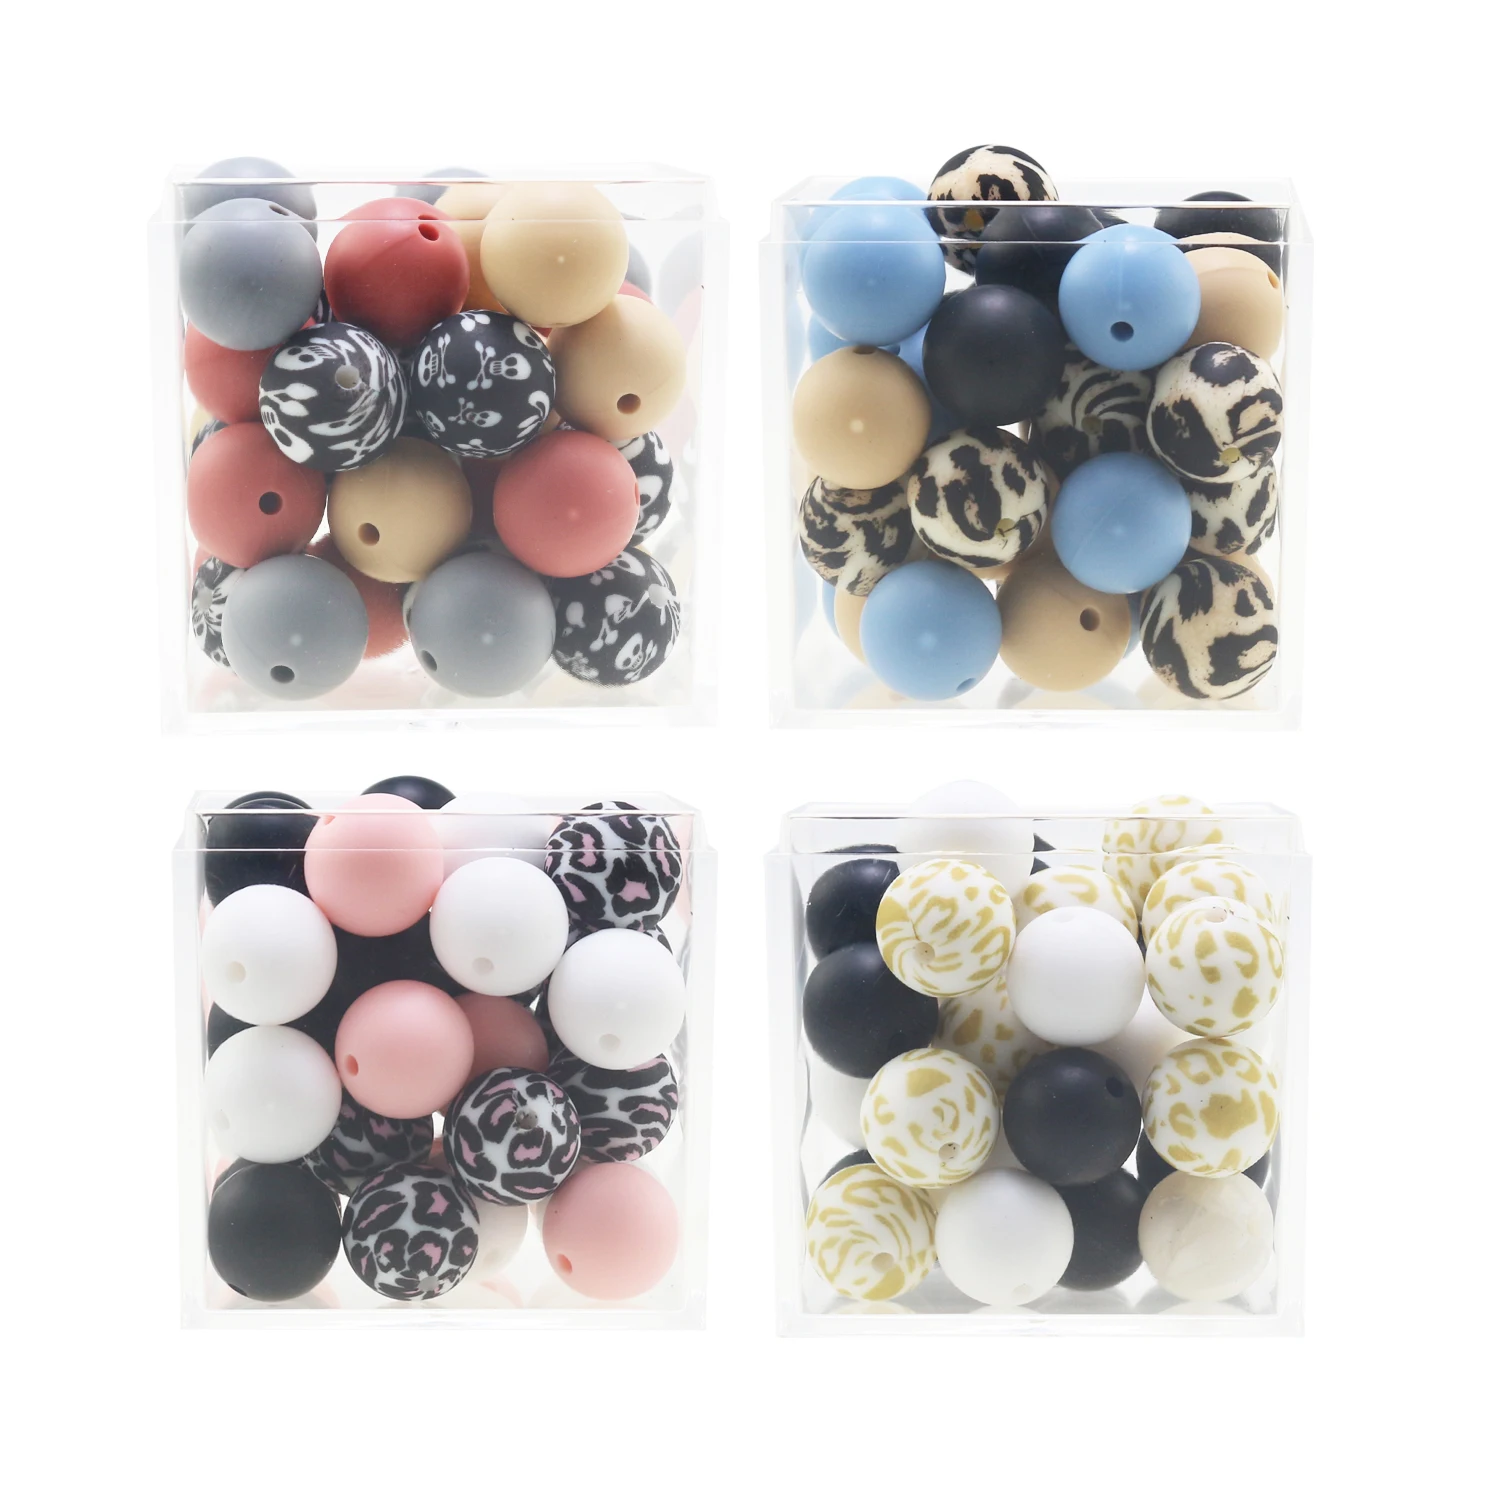 

100PCS 12/15mm Leopard Silicone Beads Baby Teething Beads For DIY Nursing Necklace Food Grade Chew Beads BPA Free Baby Teether